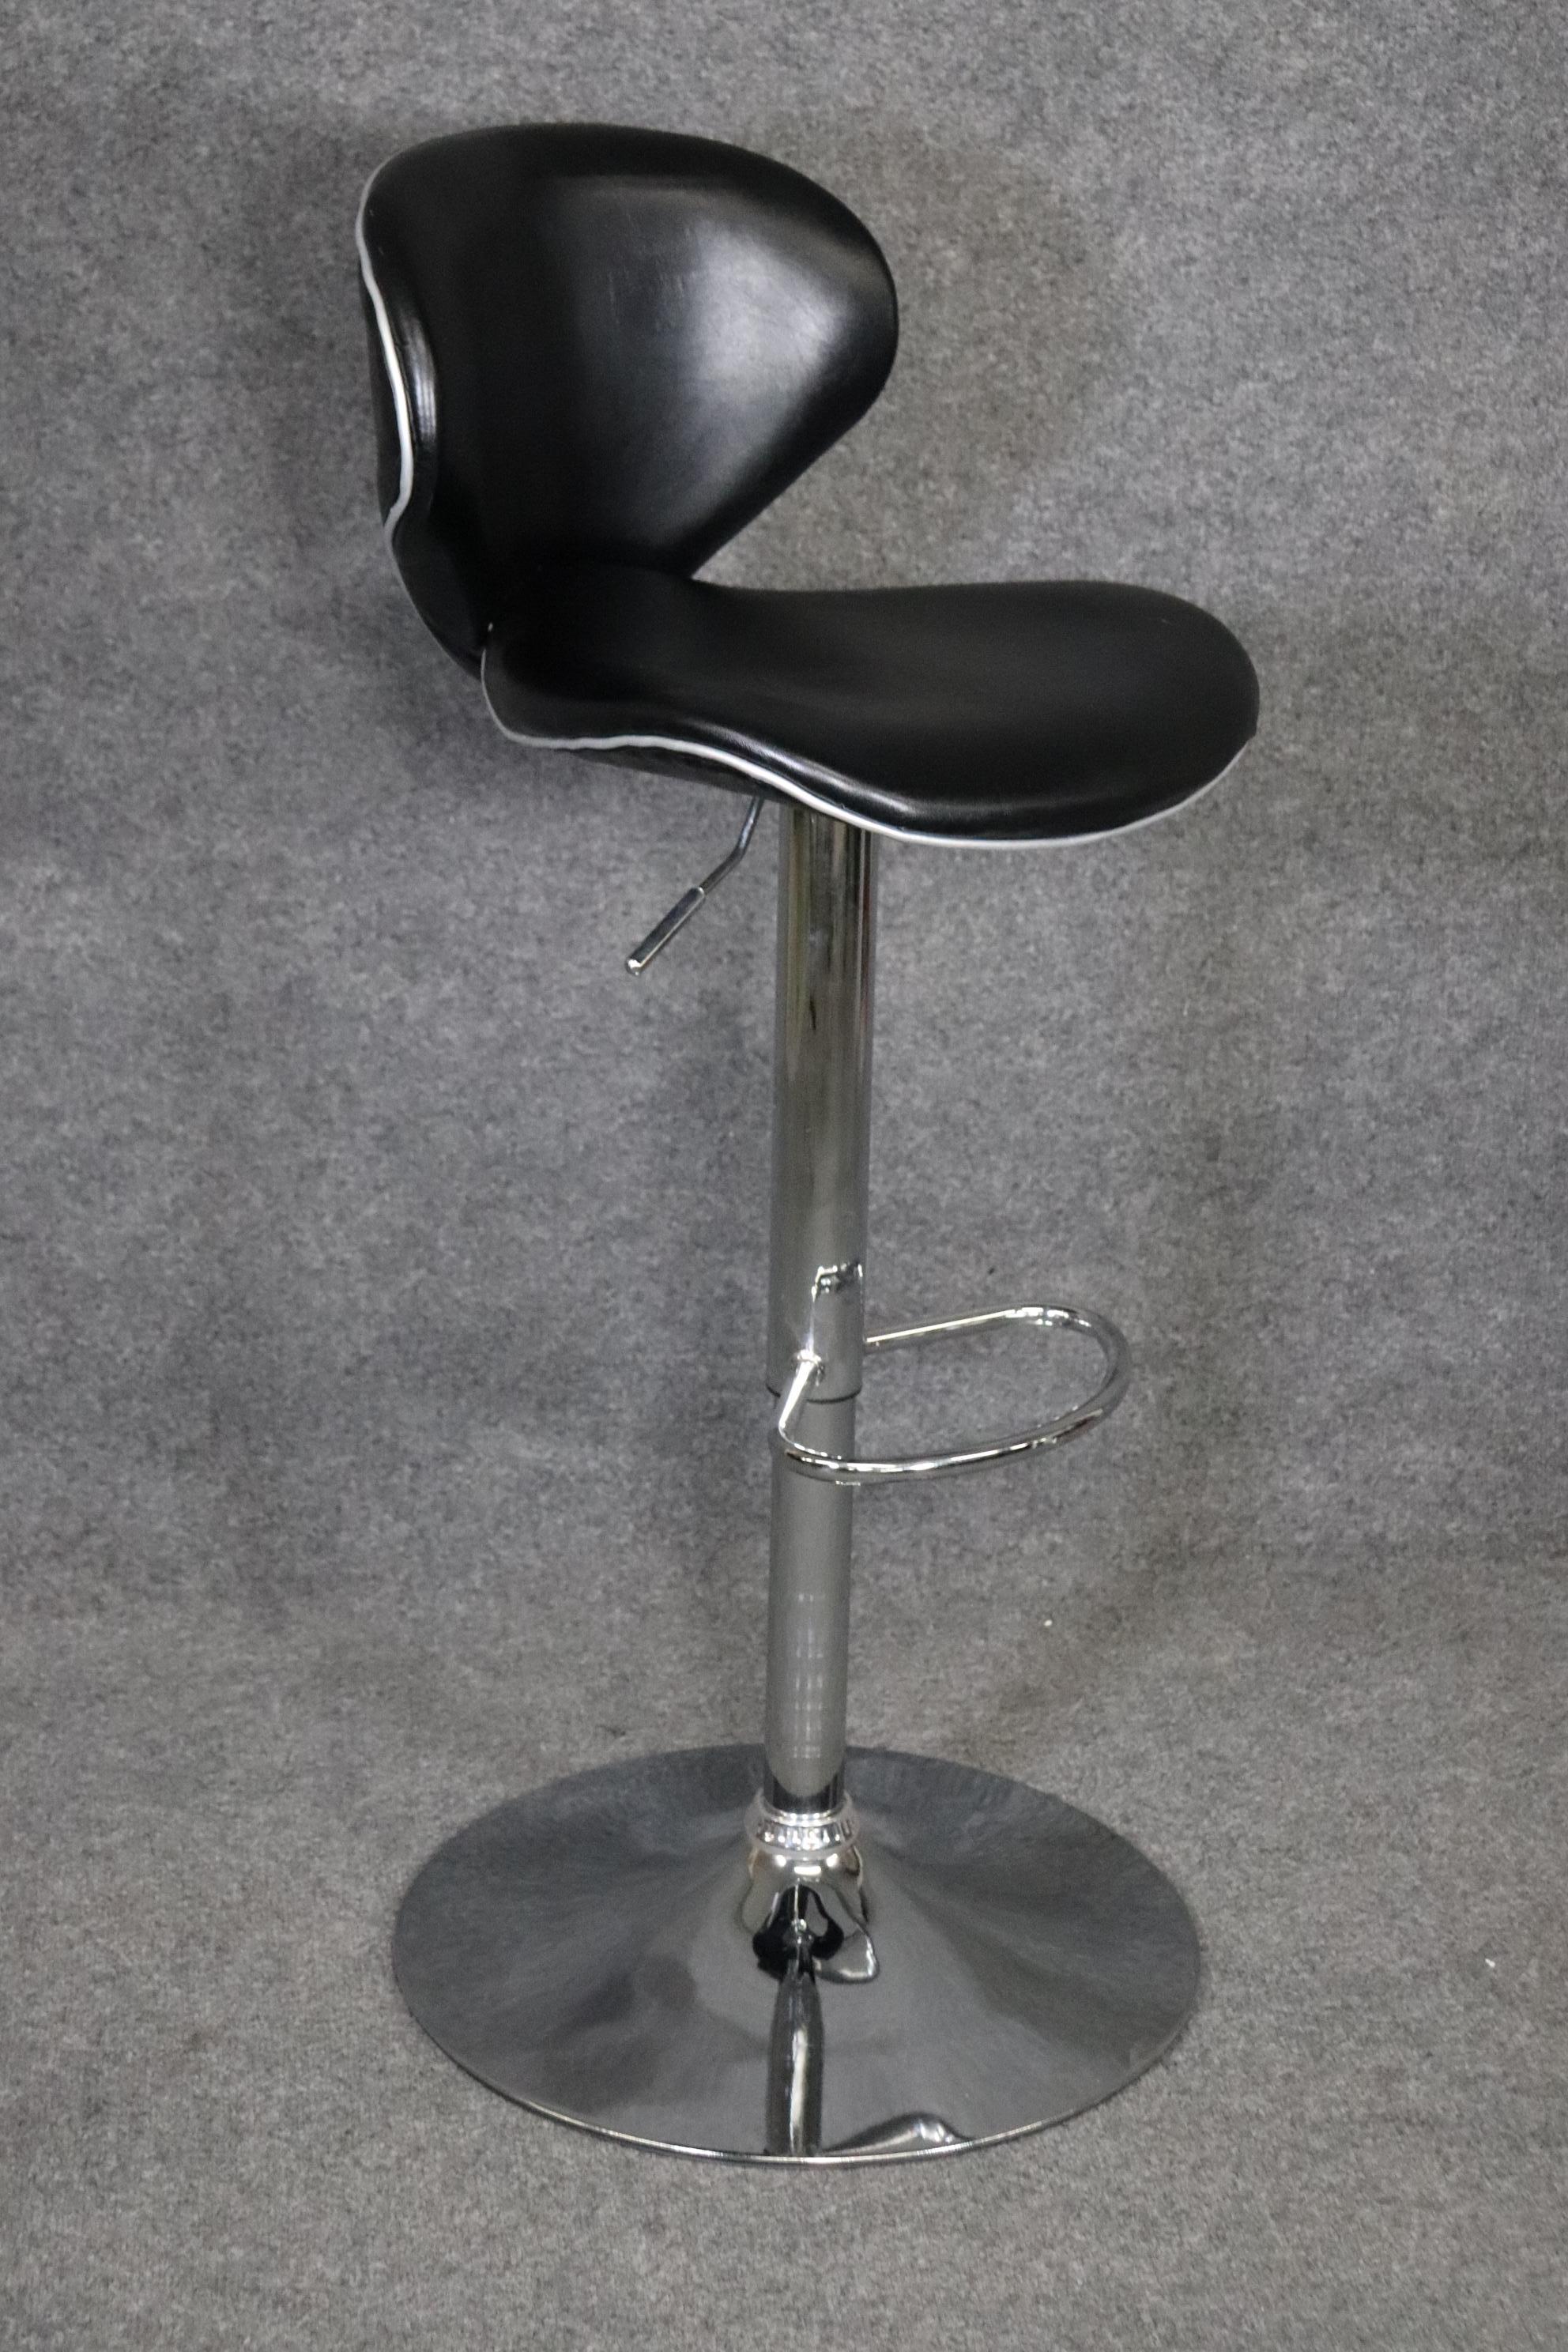 Dimensions- H: 33 3/4in - 42 3/4in W: 20in D: 20in SH: 23 1/2in - 32 1/4in 
This set of 6 Mid-Century Modern Italian Style Chrome Adjustable Bar Stools are made of the highest quality and are truly spectacular! If you look at the photos provided